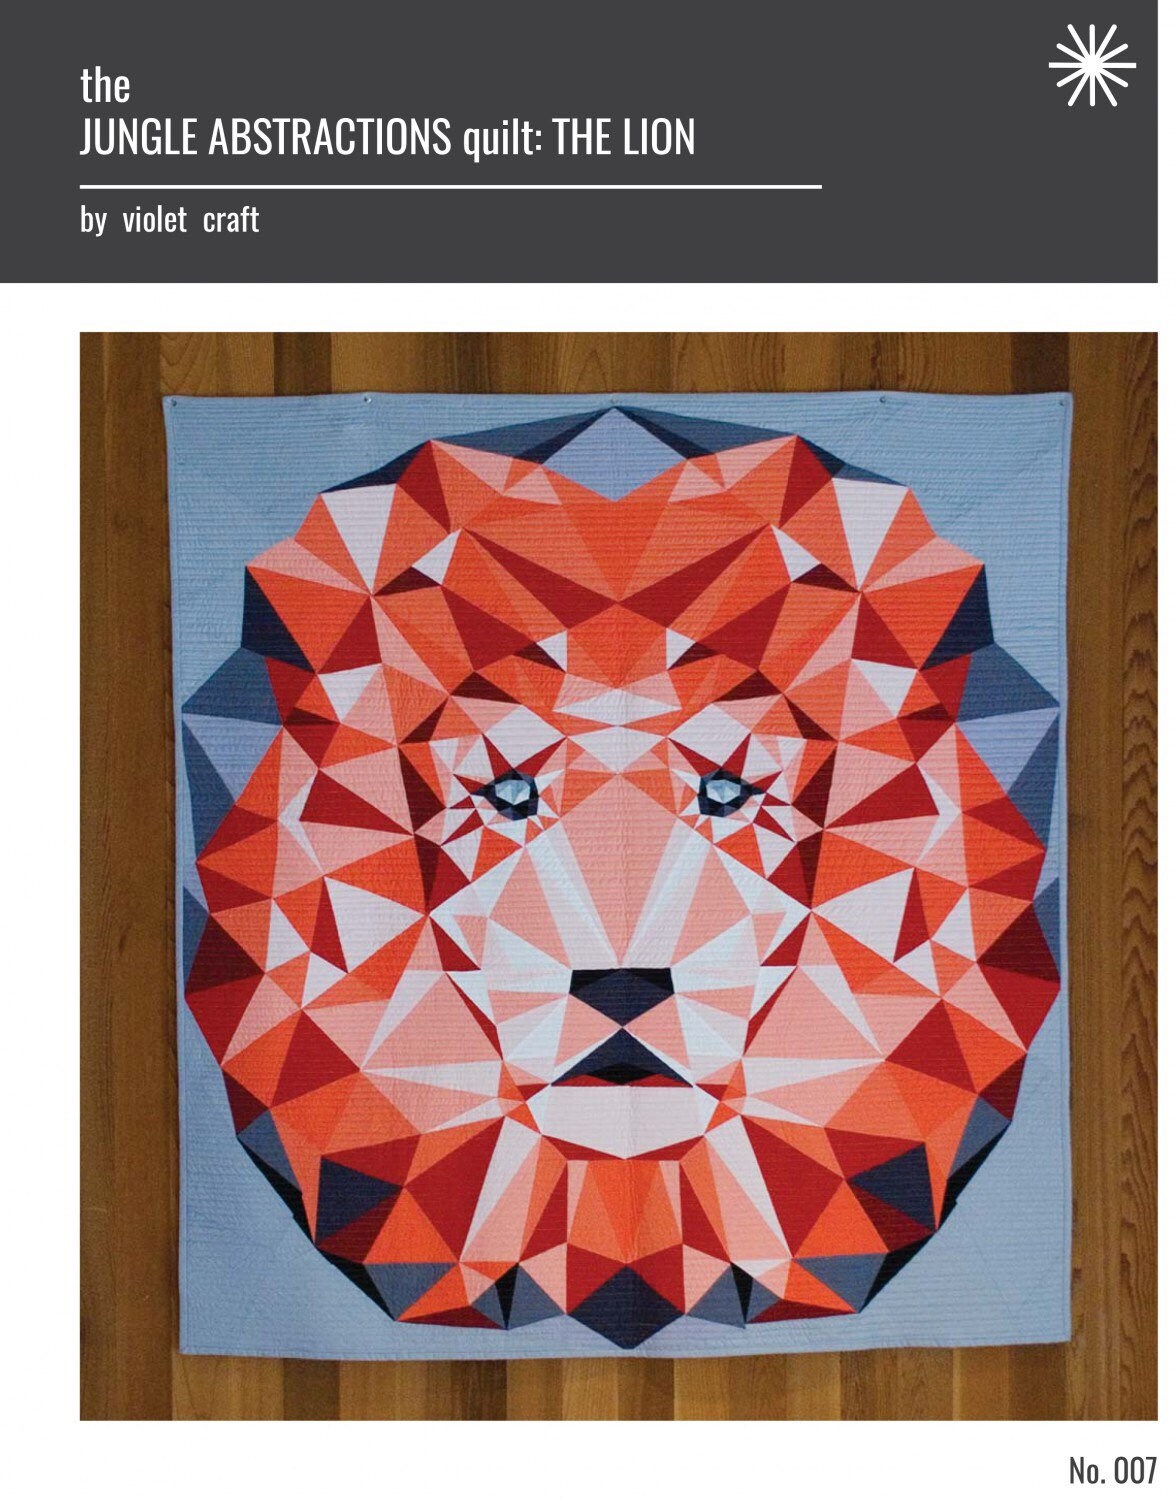 Jungle Abstractions Quilt Pattern - The Lion Quilt - Violet Craft - Foundation Paper Piecing Pattern